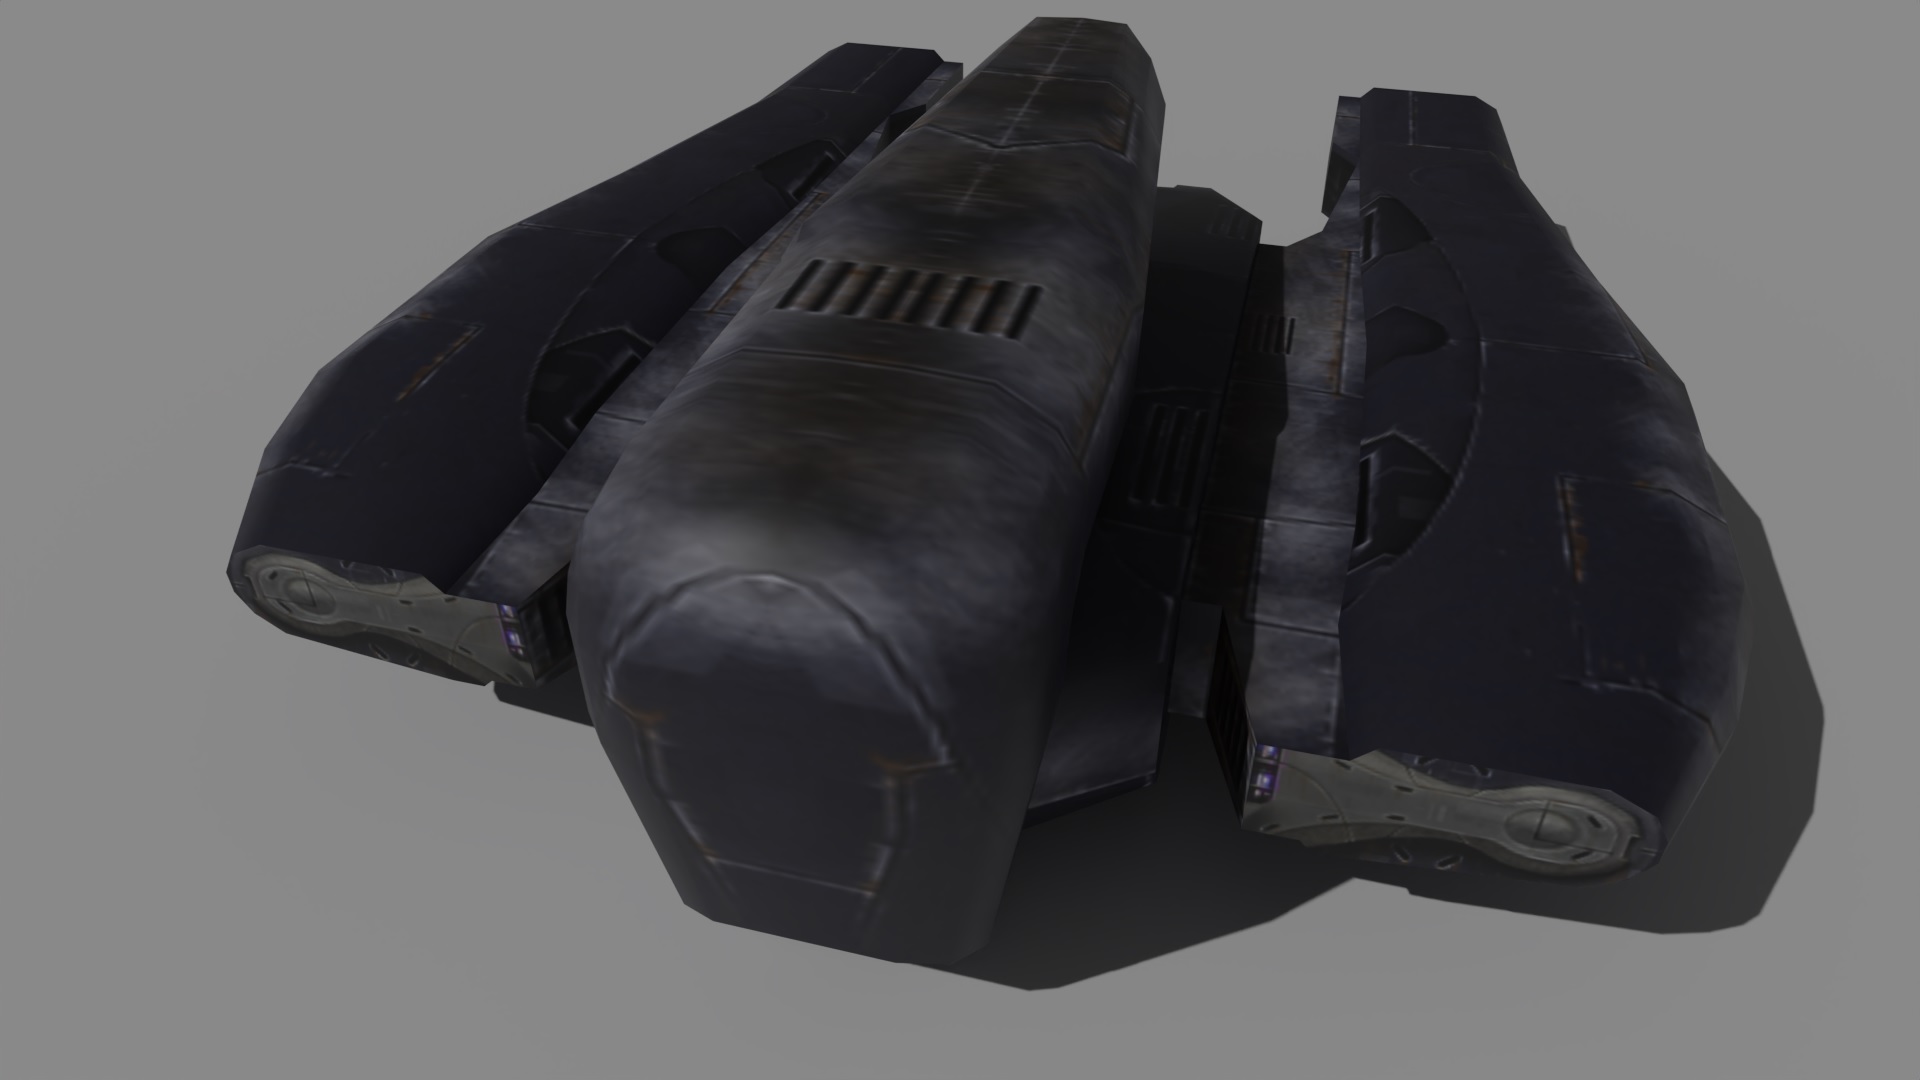 Image of Covenant command shuttle